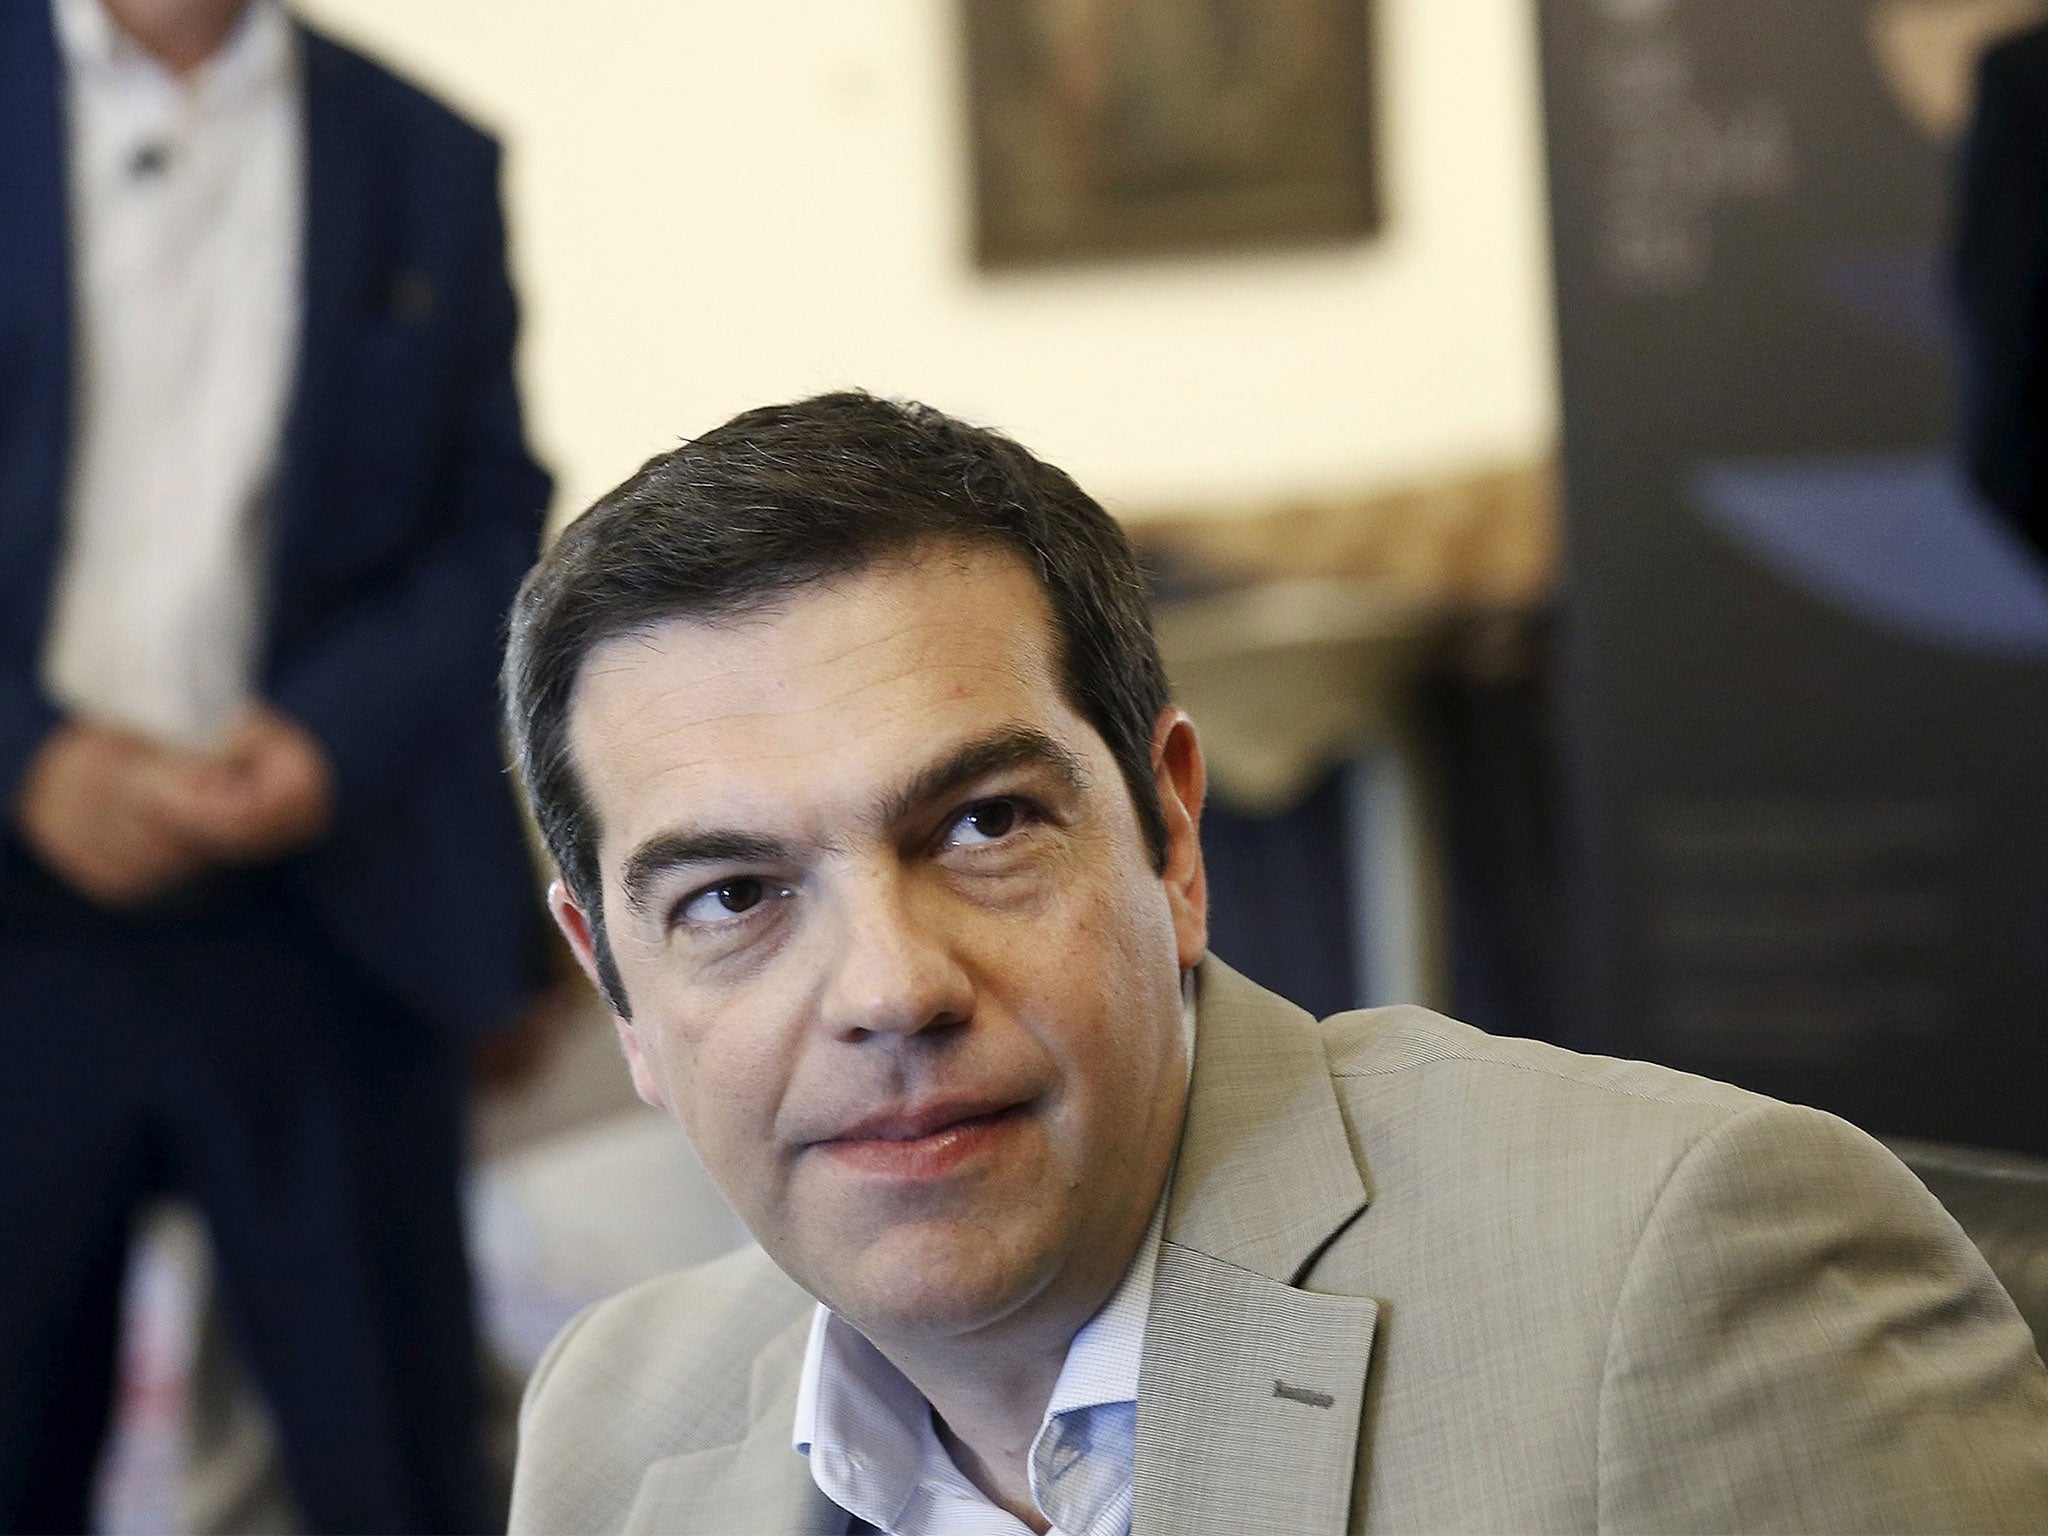 Greek Prime Minister, Alexis Tsipras, insisted to reporters that Athens had submitted its own final proposal to lenders